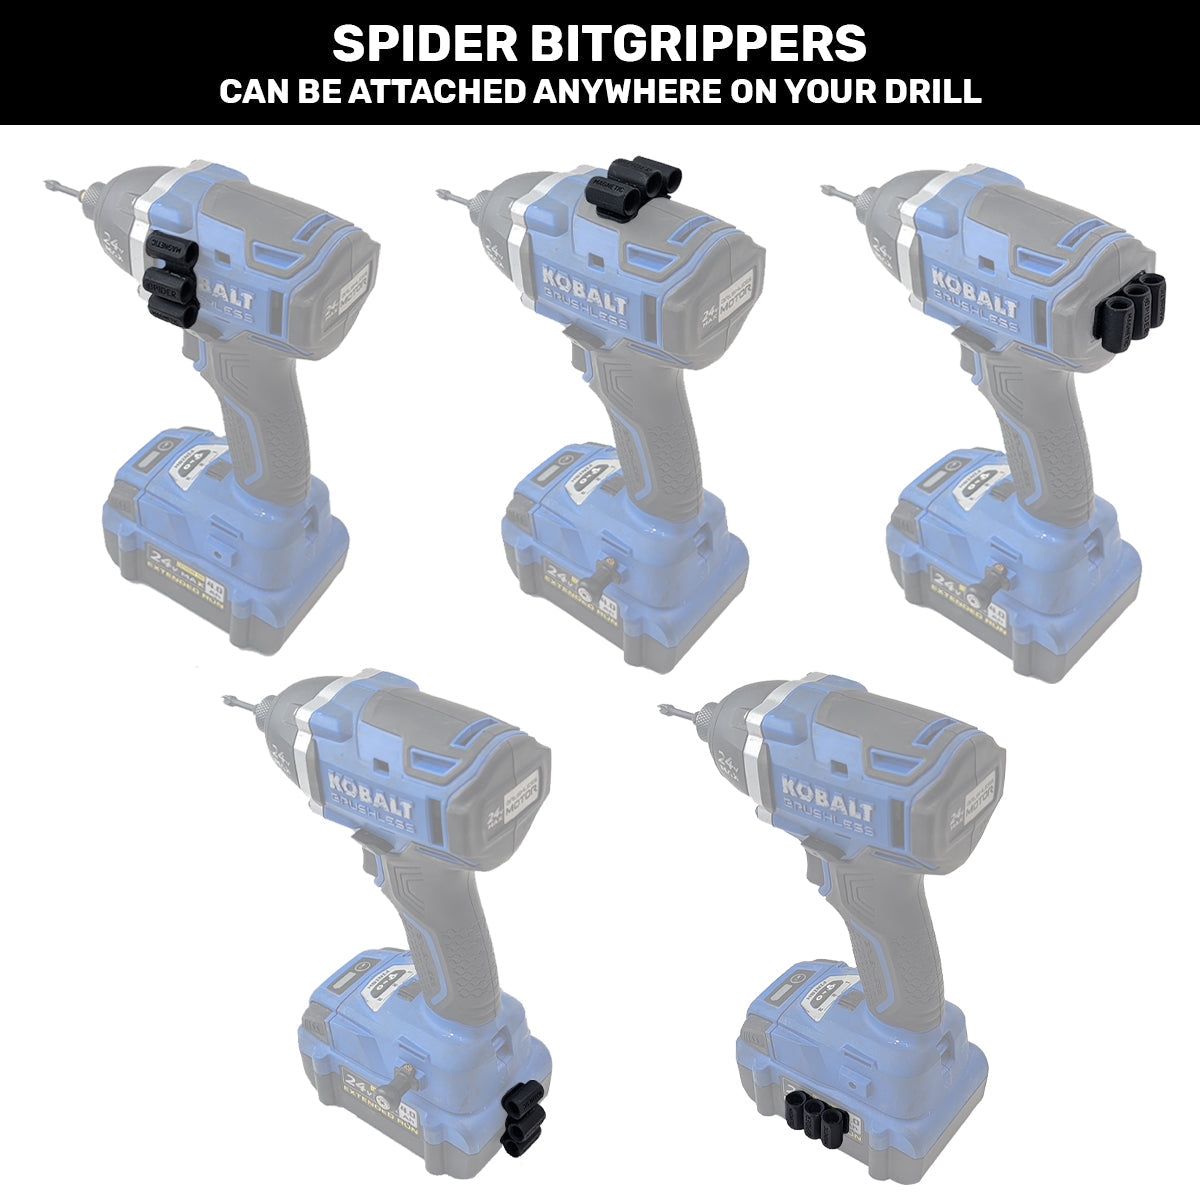 5122TH: Magnetic BitGripper - Pack of 3